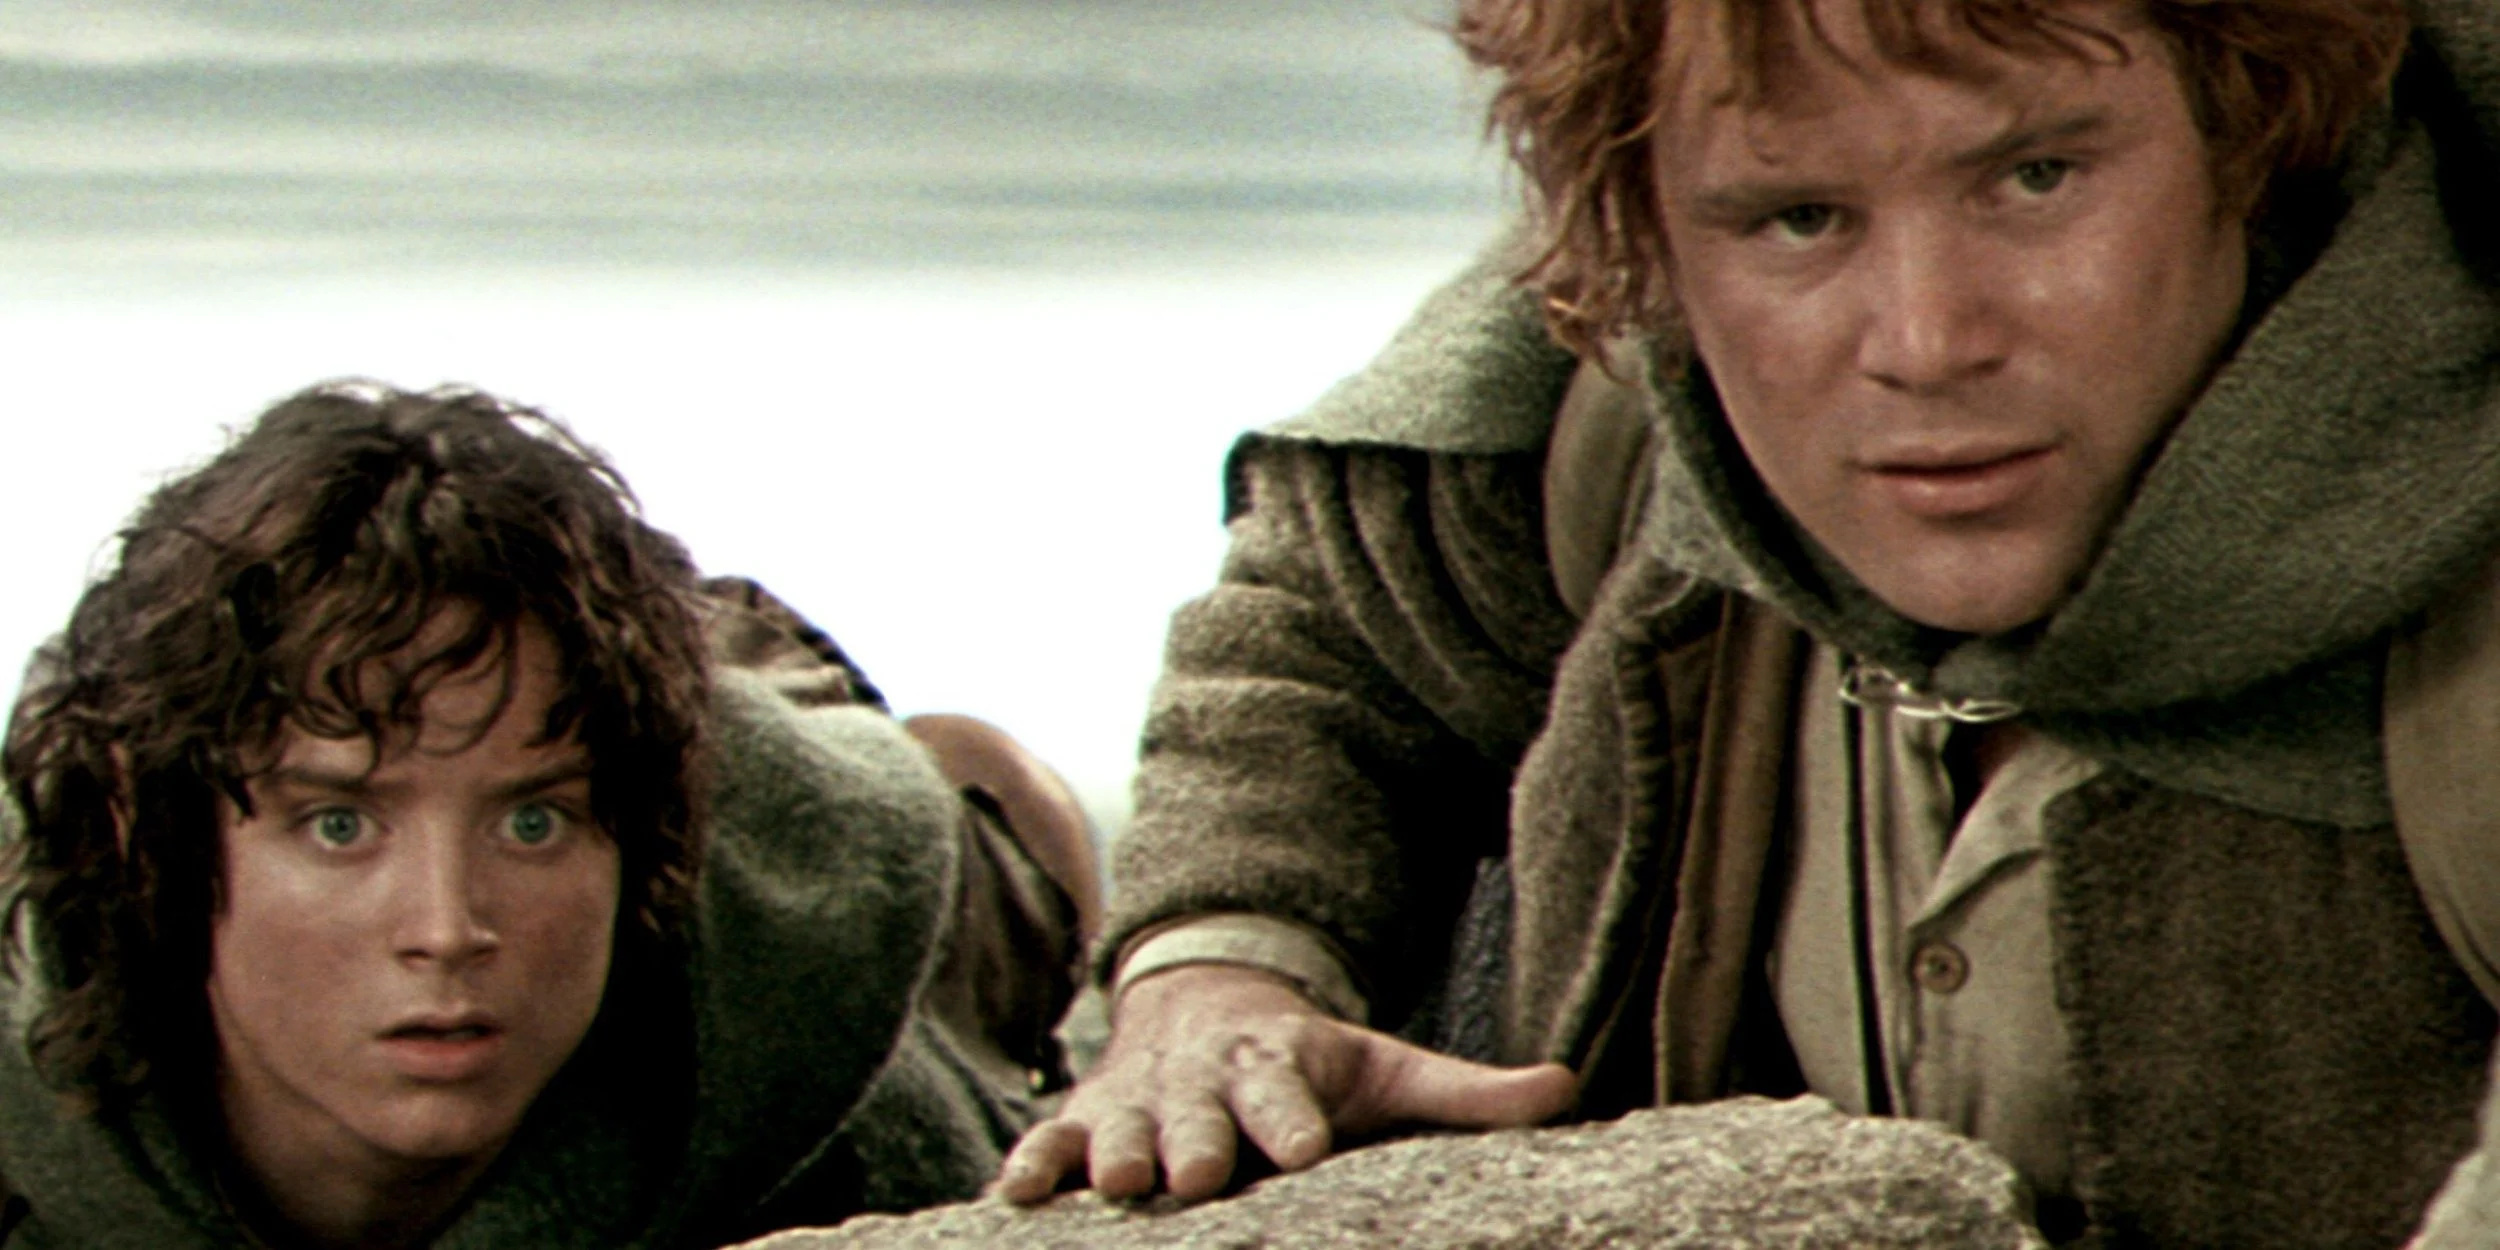 Sam, Unsung hero, Lord of the Rings trivia, Lesser-known facts, 2500x1250 Dual Screen Desktop